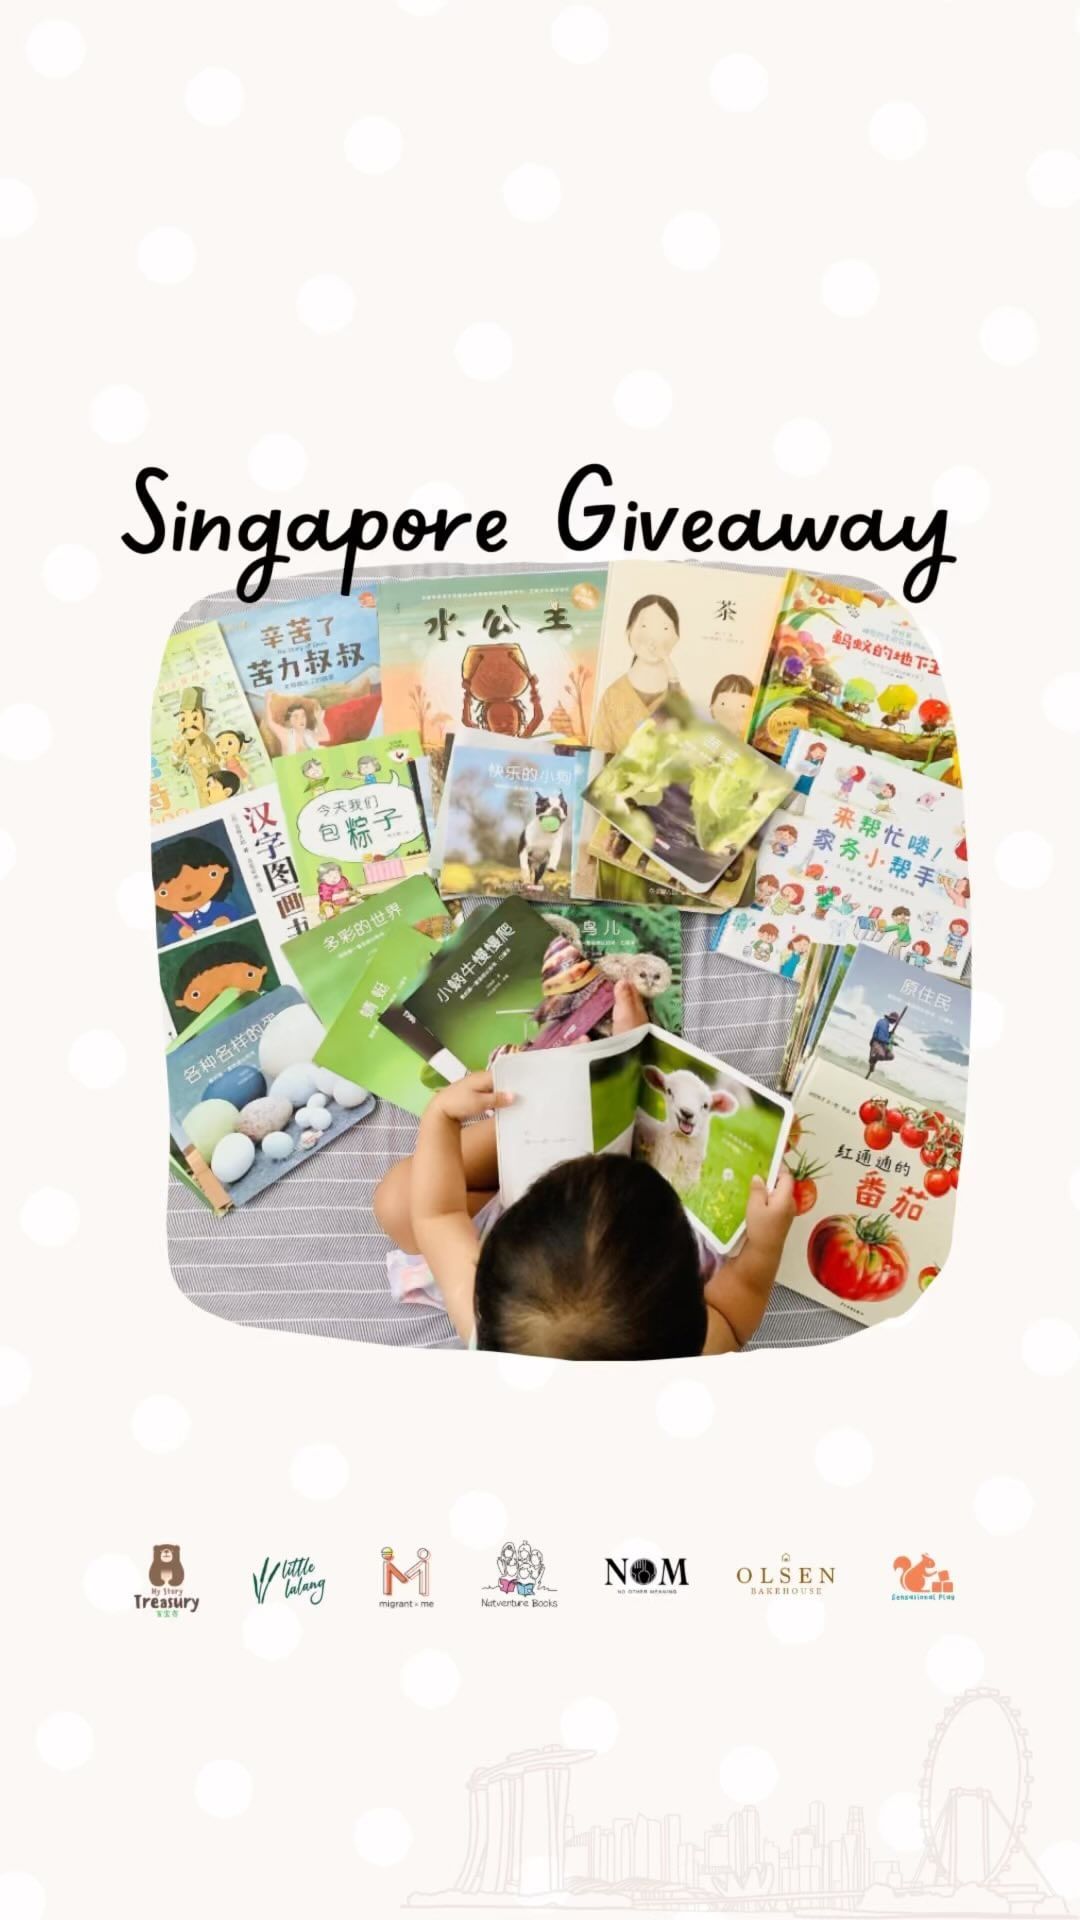 This is one practical and meaningful giveaway